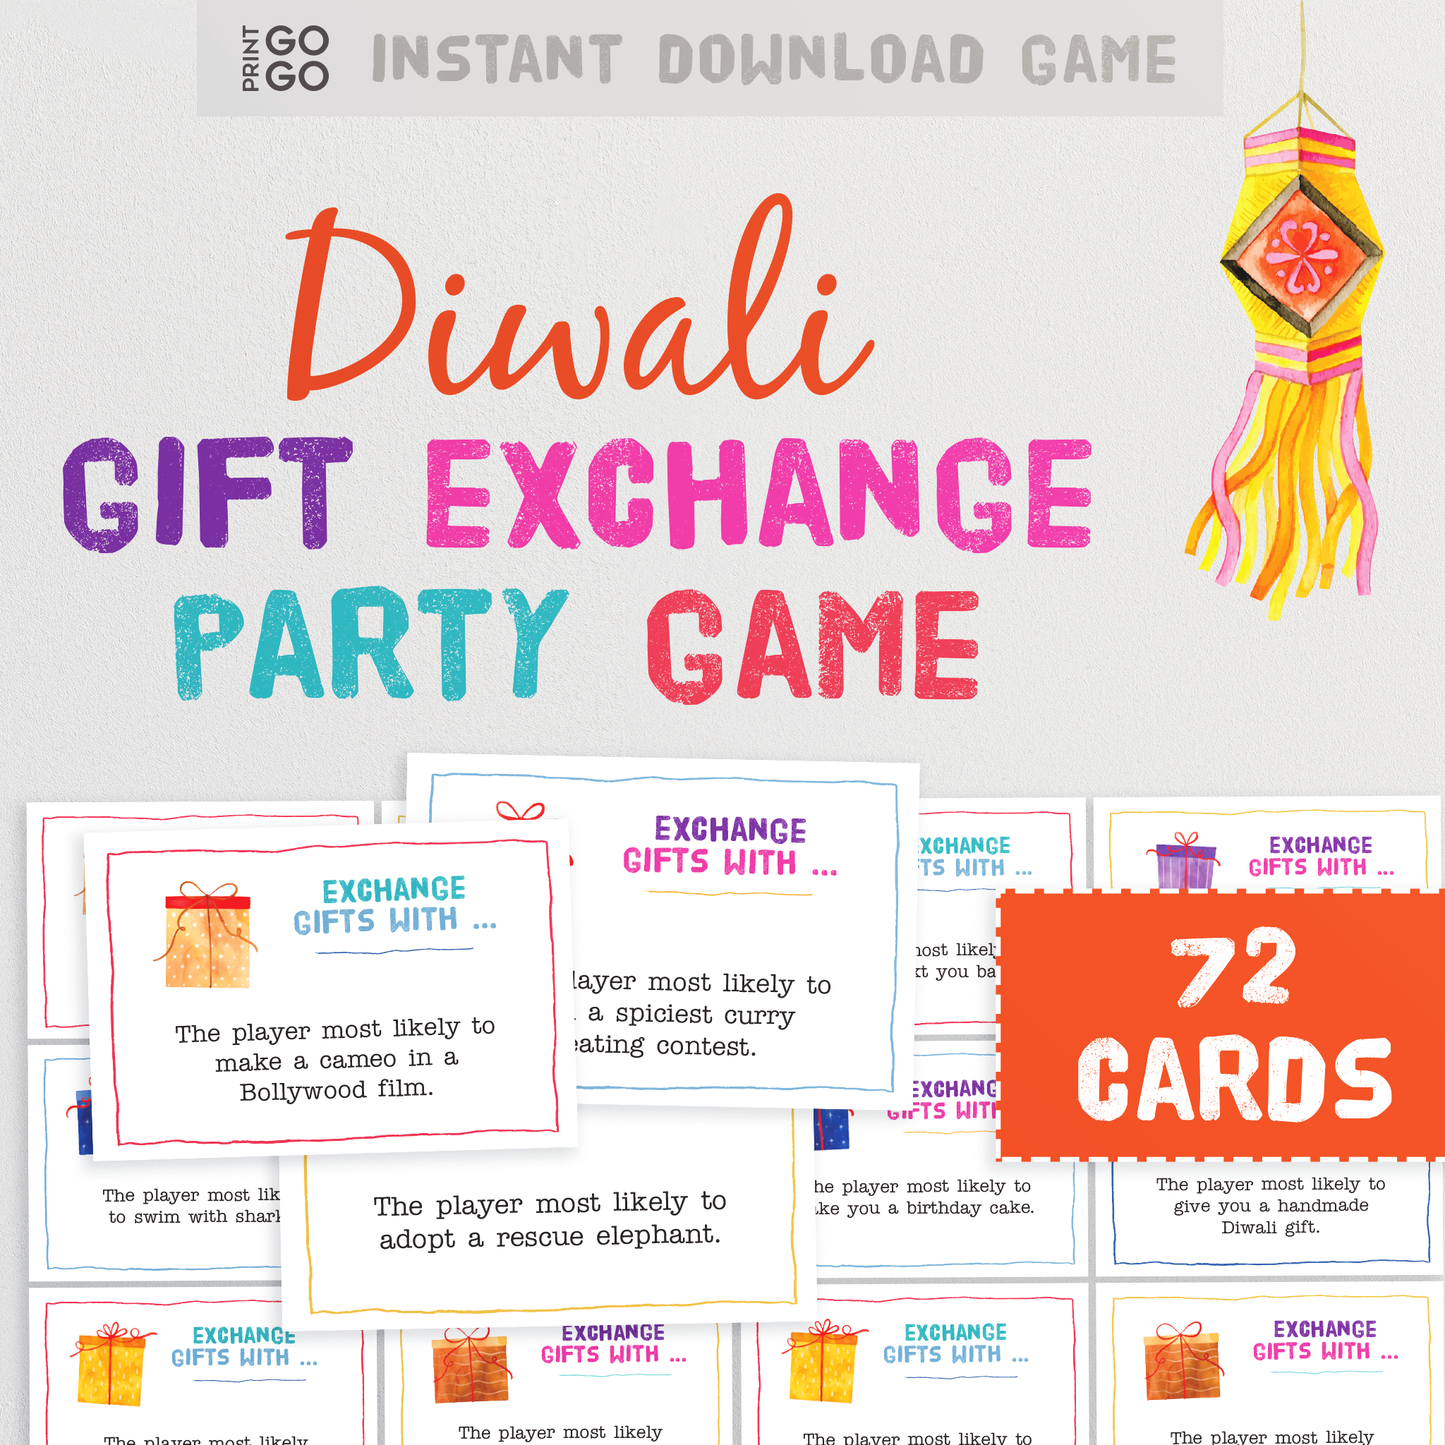 Diwali Gift Exchange Party Game - The Hilarious Yankee Swap Gift Game for the Festival of Lights | Alternative Present Swap Group Ideas